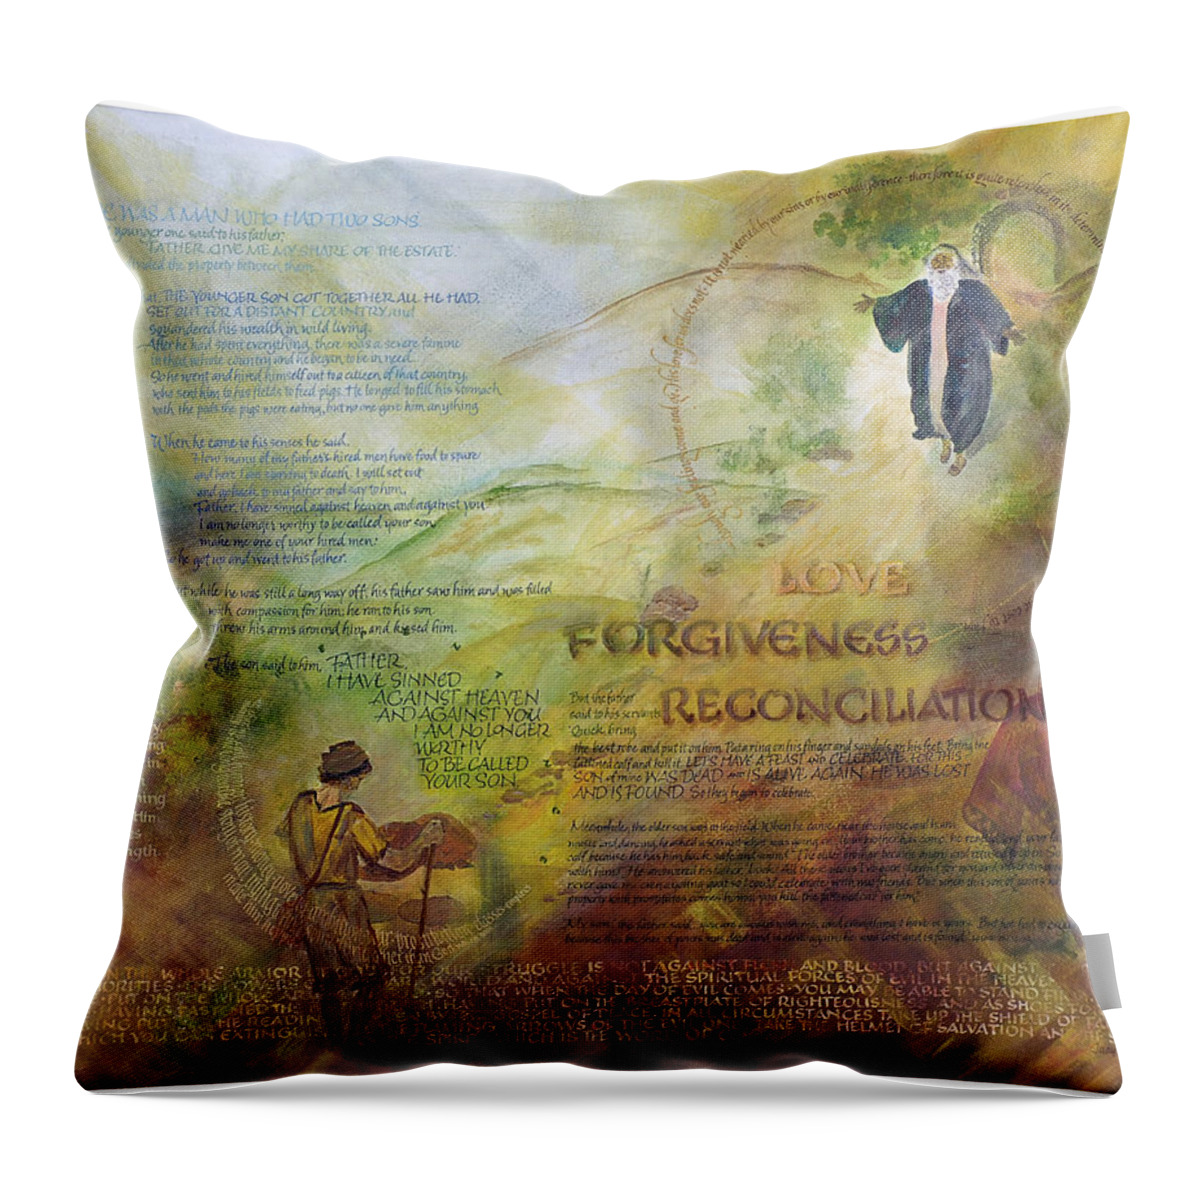 Ephesians 6 Throw Pillow featuring the painting Love Forgiveness Reconciliation by Judy Dodds